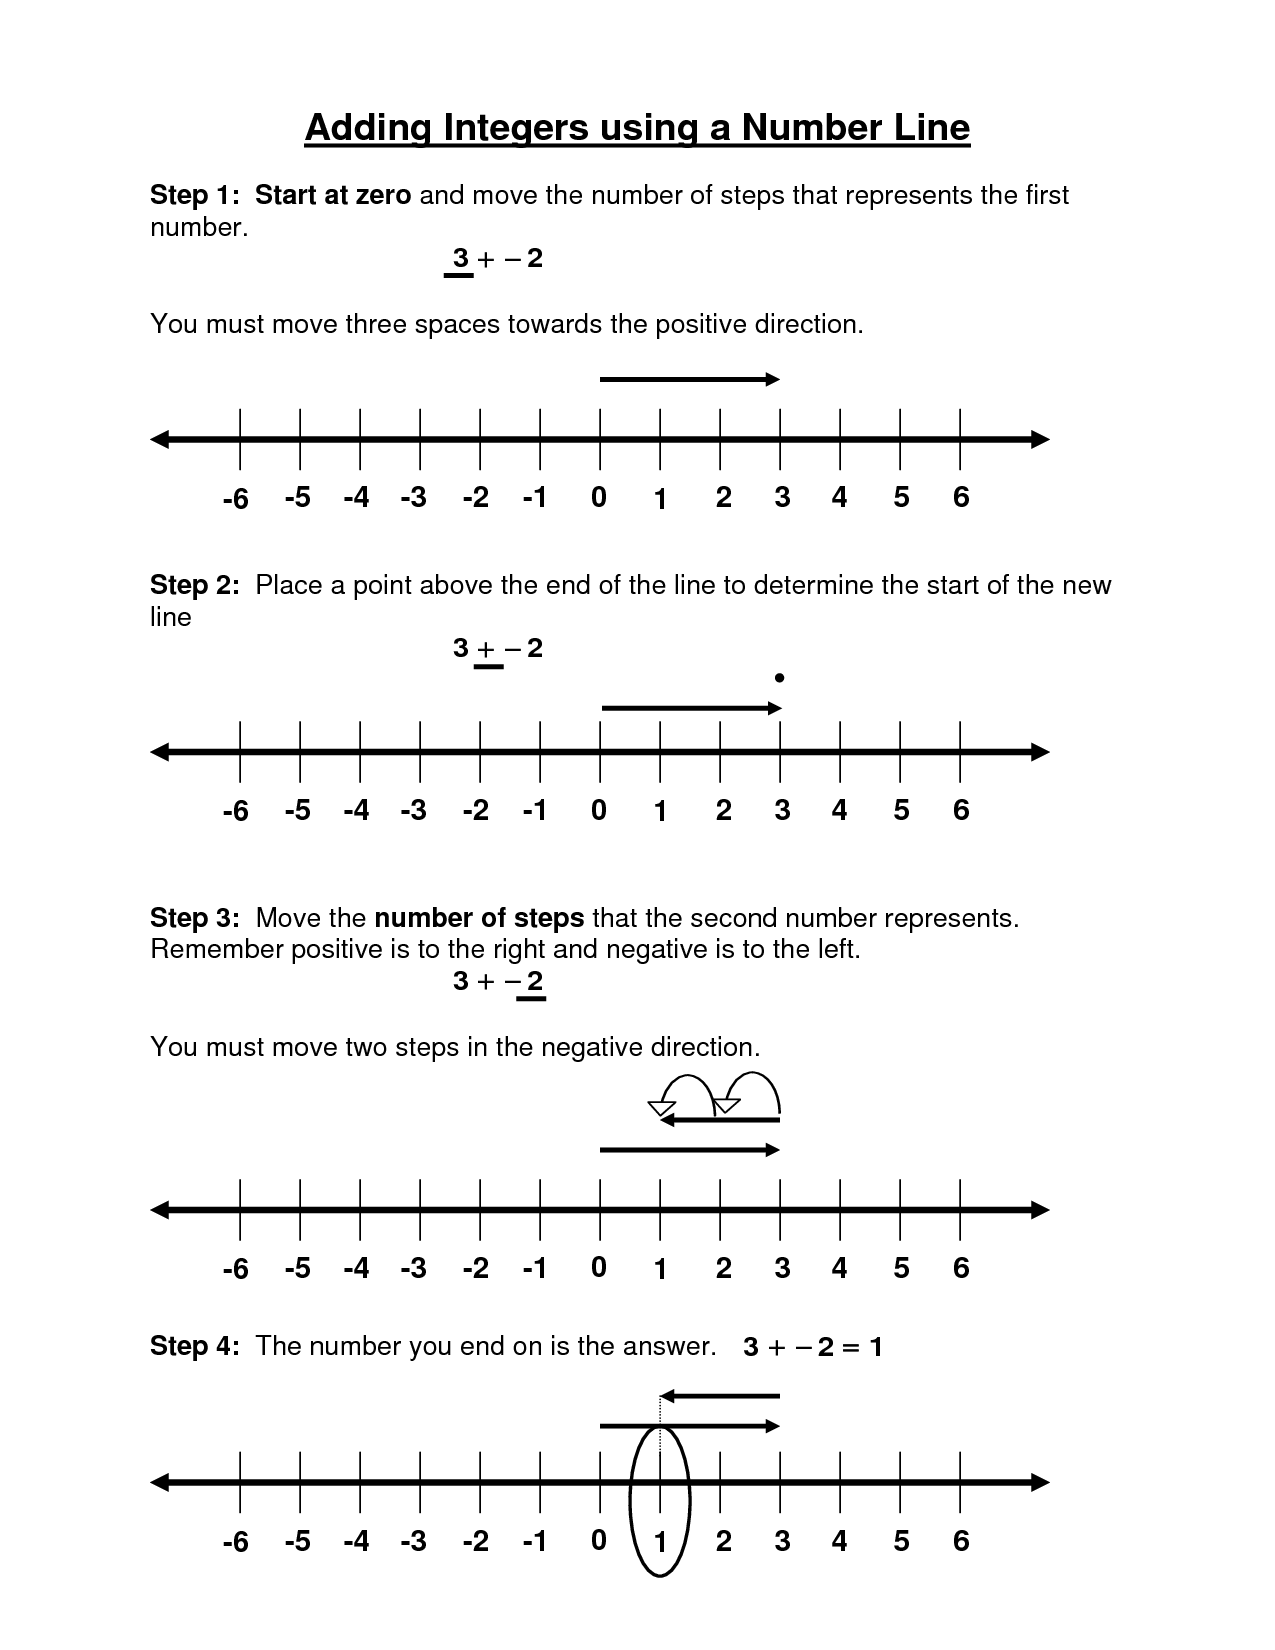 Adding Integers With Number Lines Worksheet Pdf